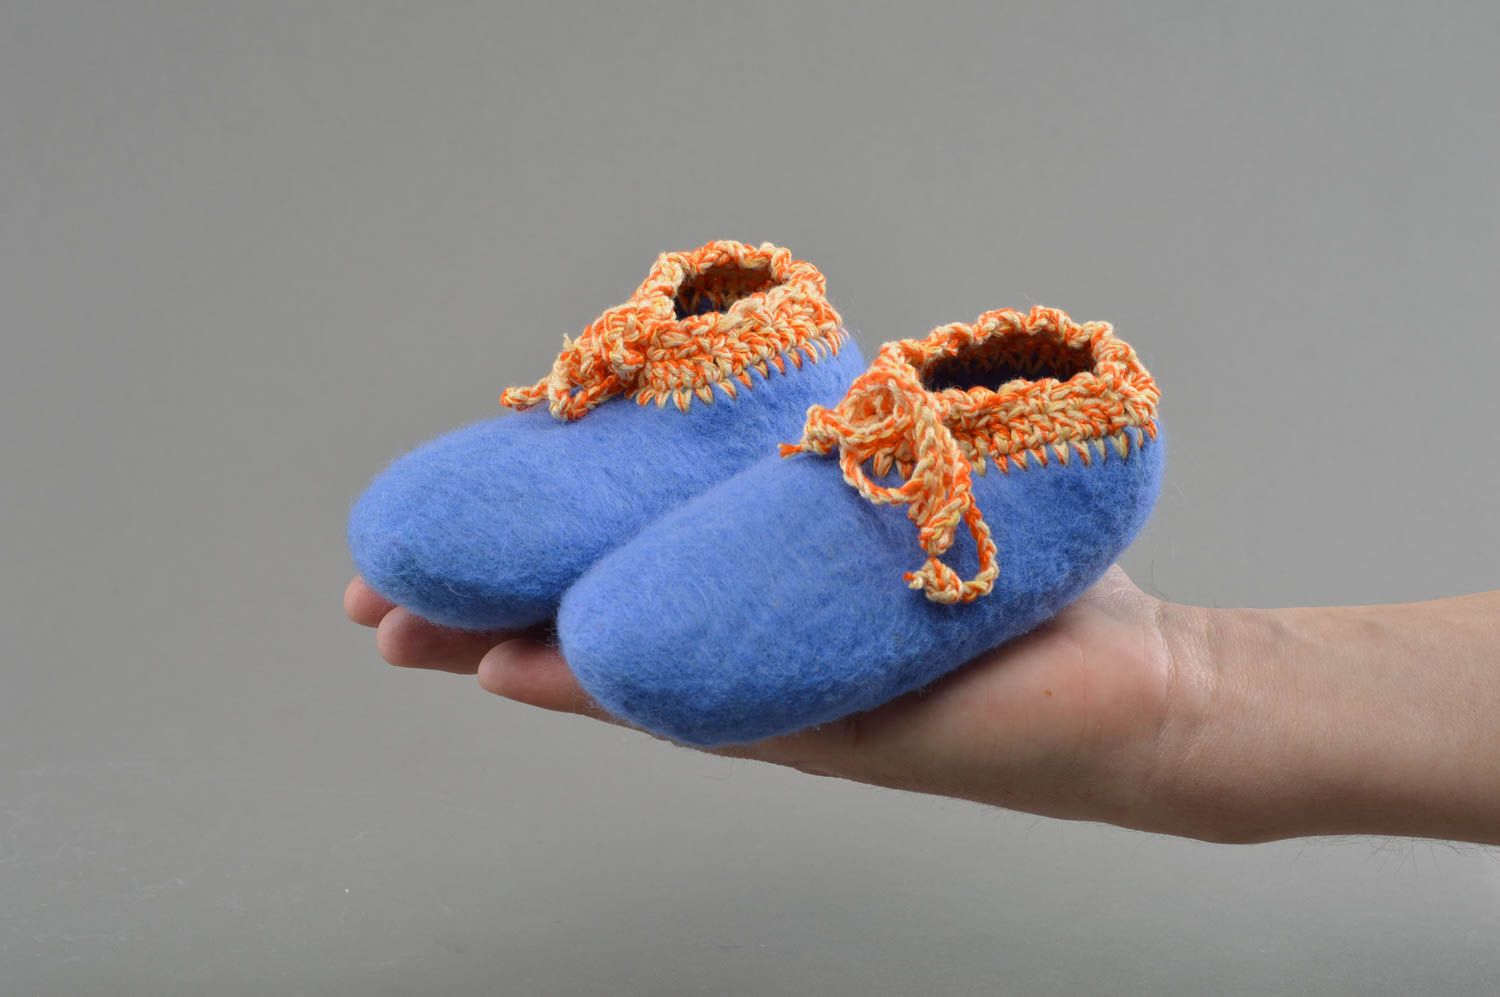 Handmade bright blue felted woolen baby booties with crocheted over edges photo 4